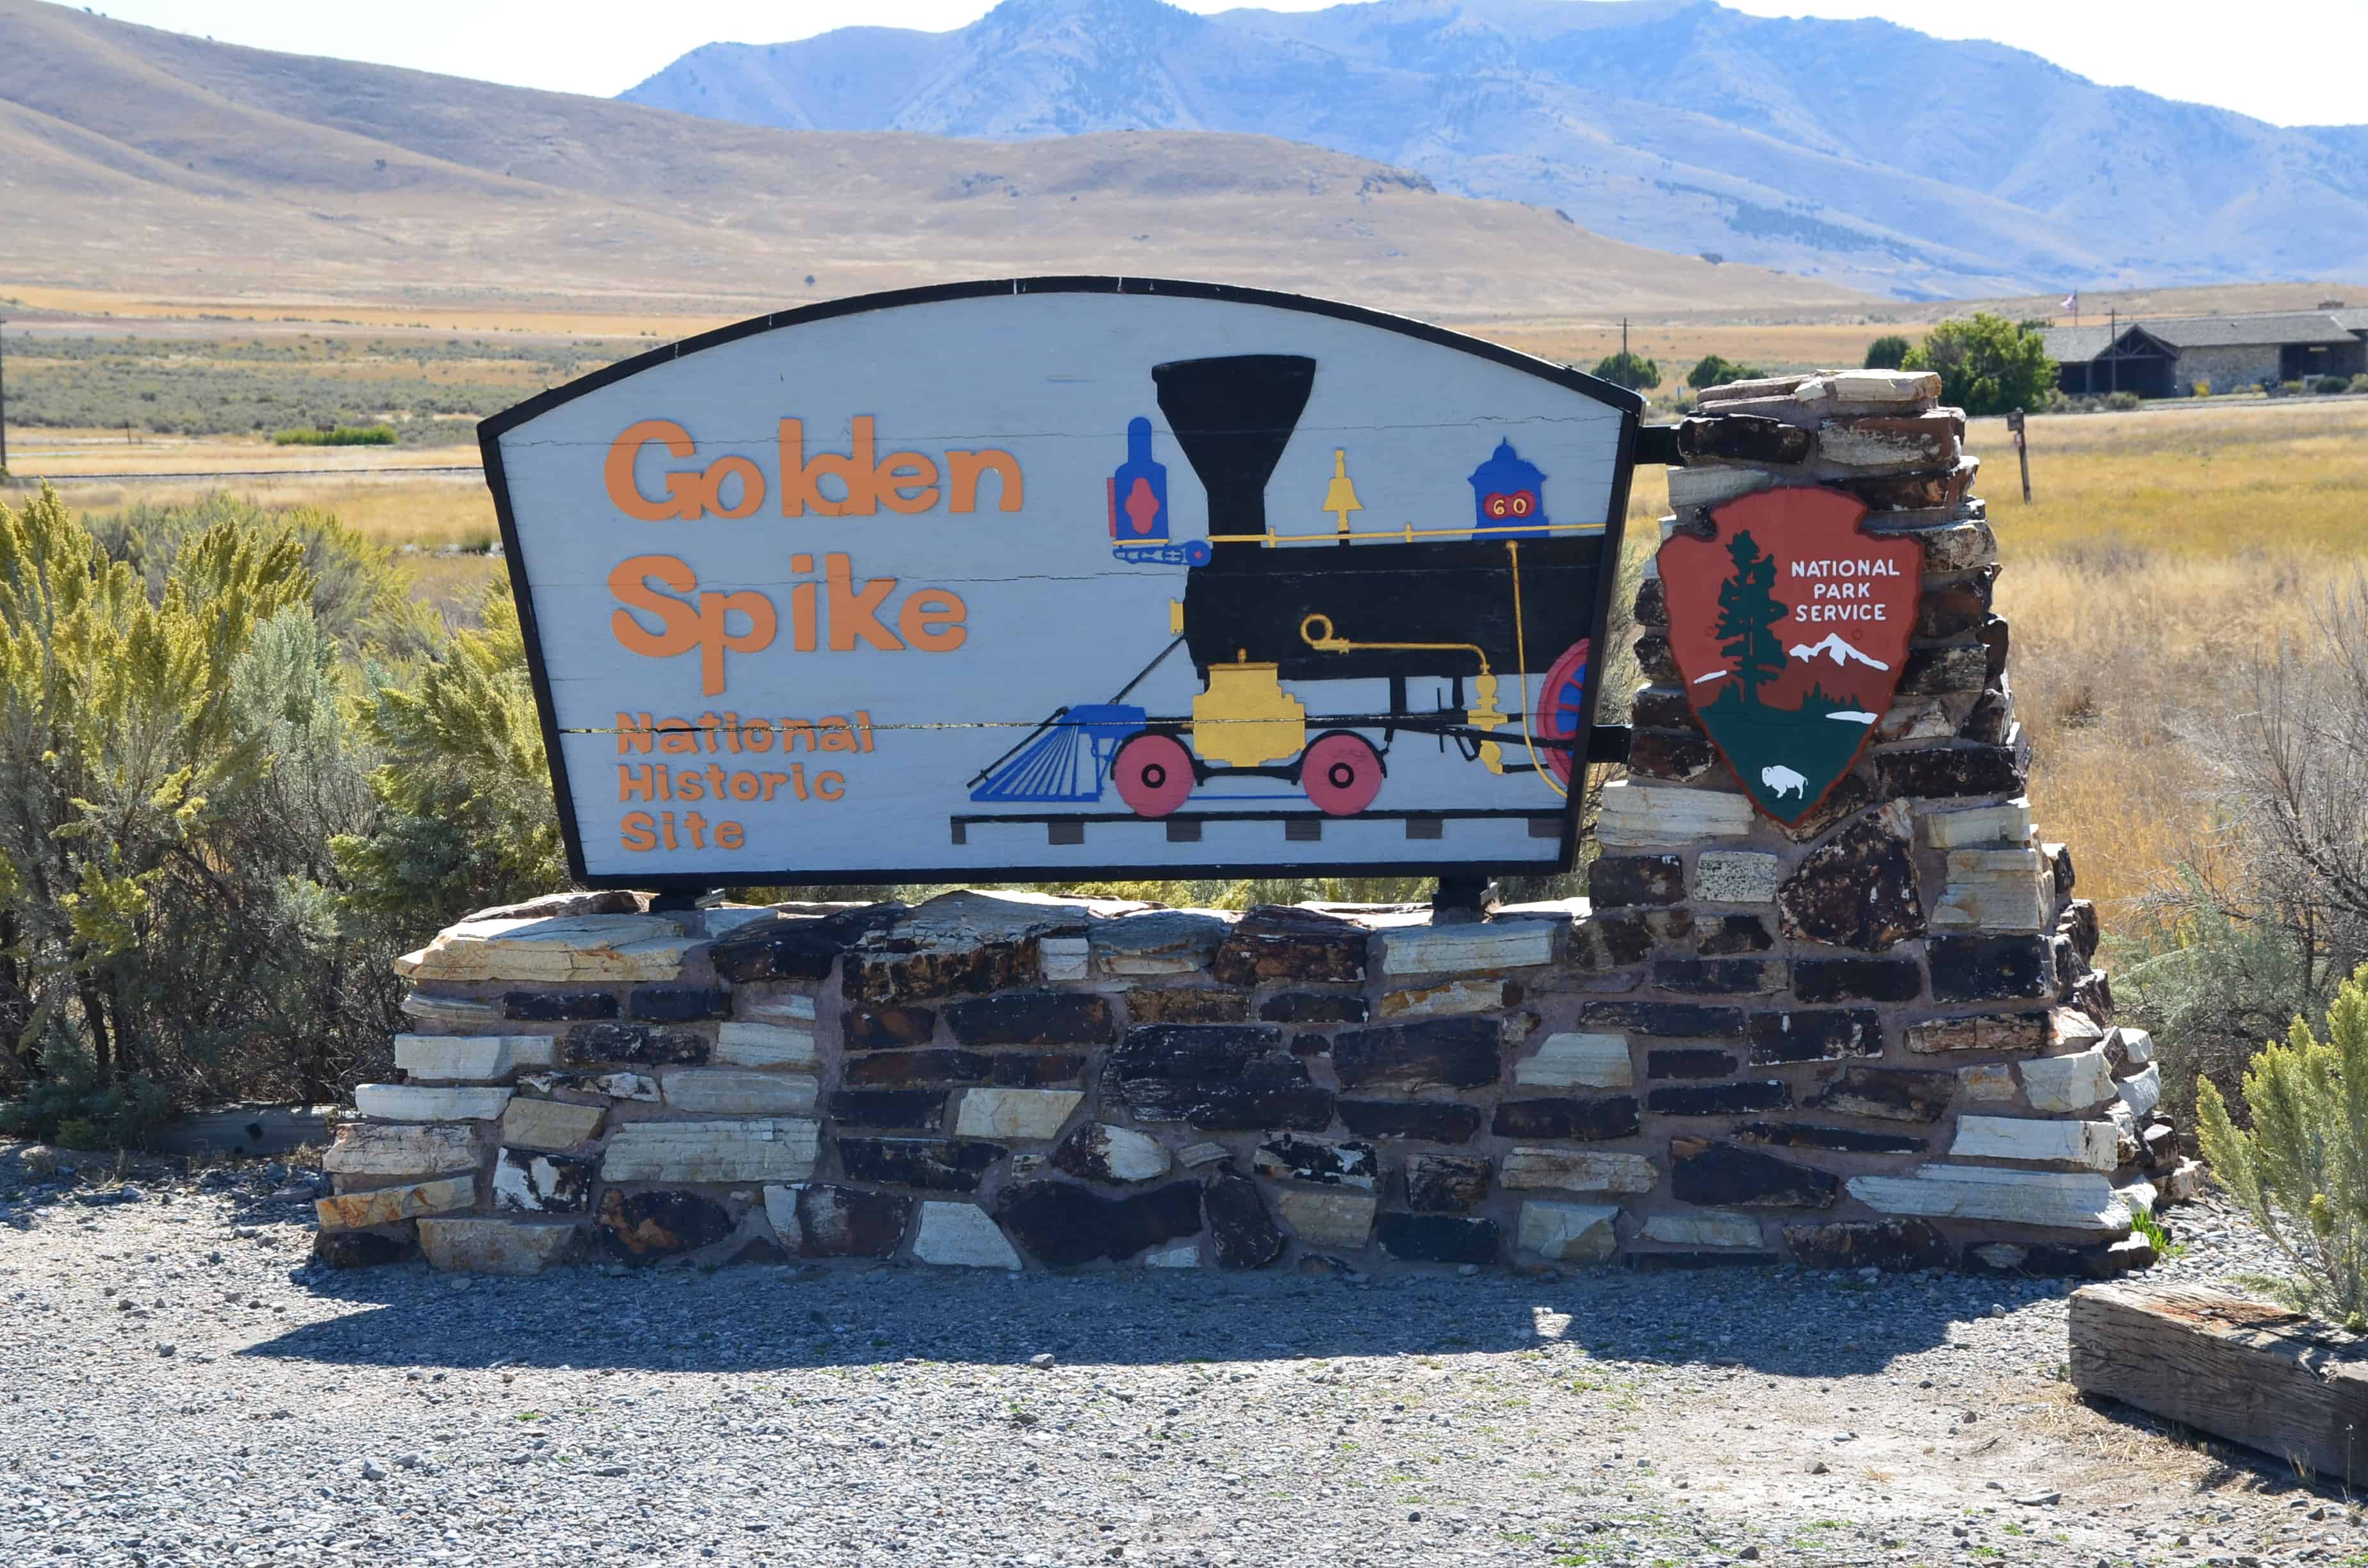 Sign at the Golden Spike National Historic Site in 2015 (before re-designation as a national historical park), Promontory Summit, Utah